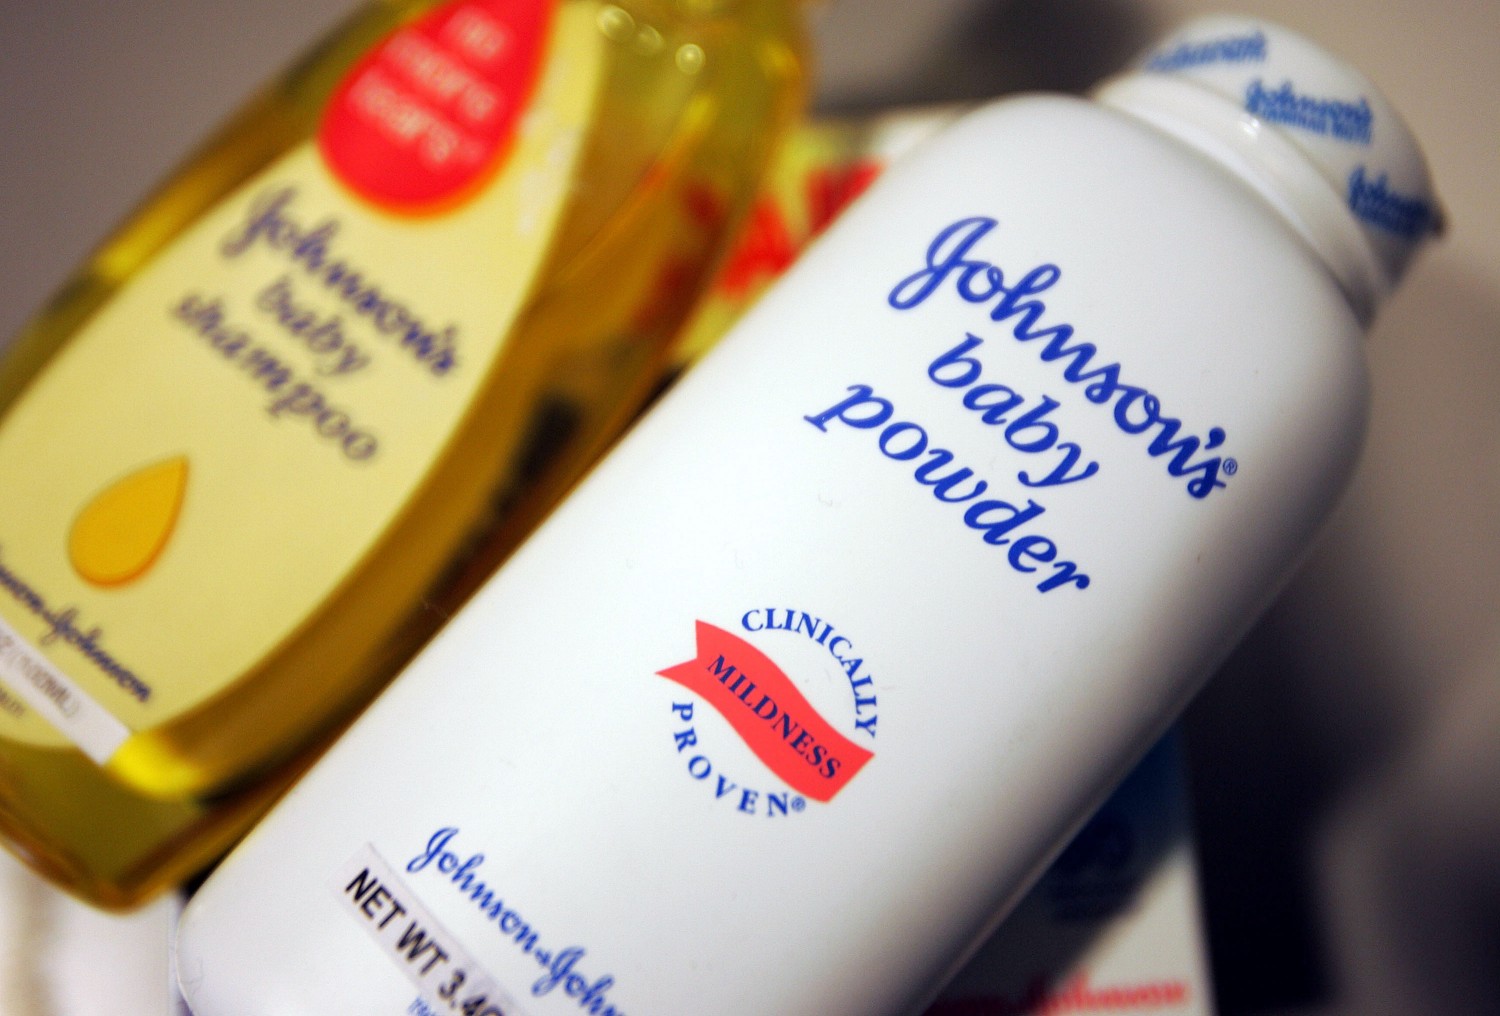 Johnson And Johnson's Buys Guidant Corp